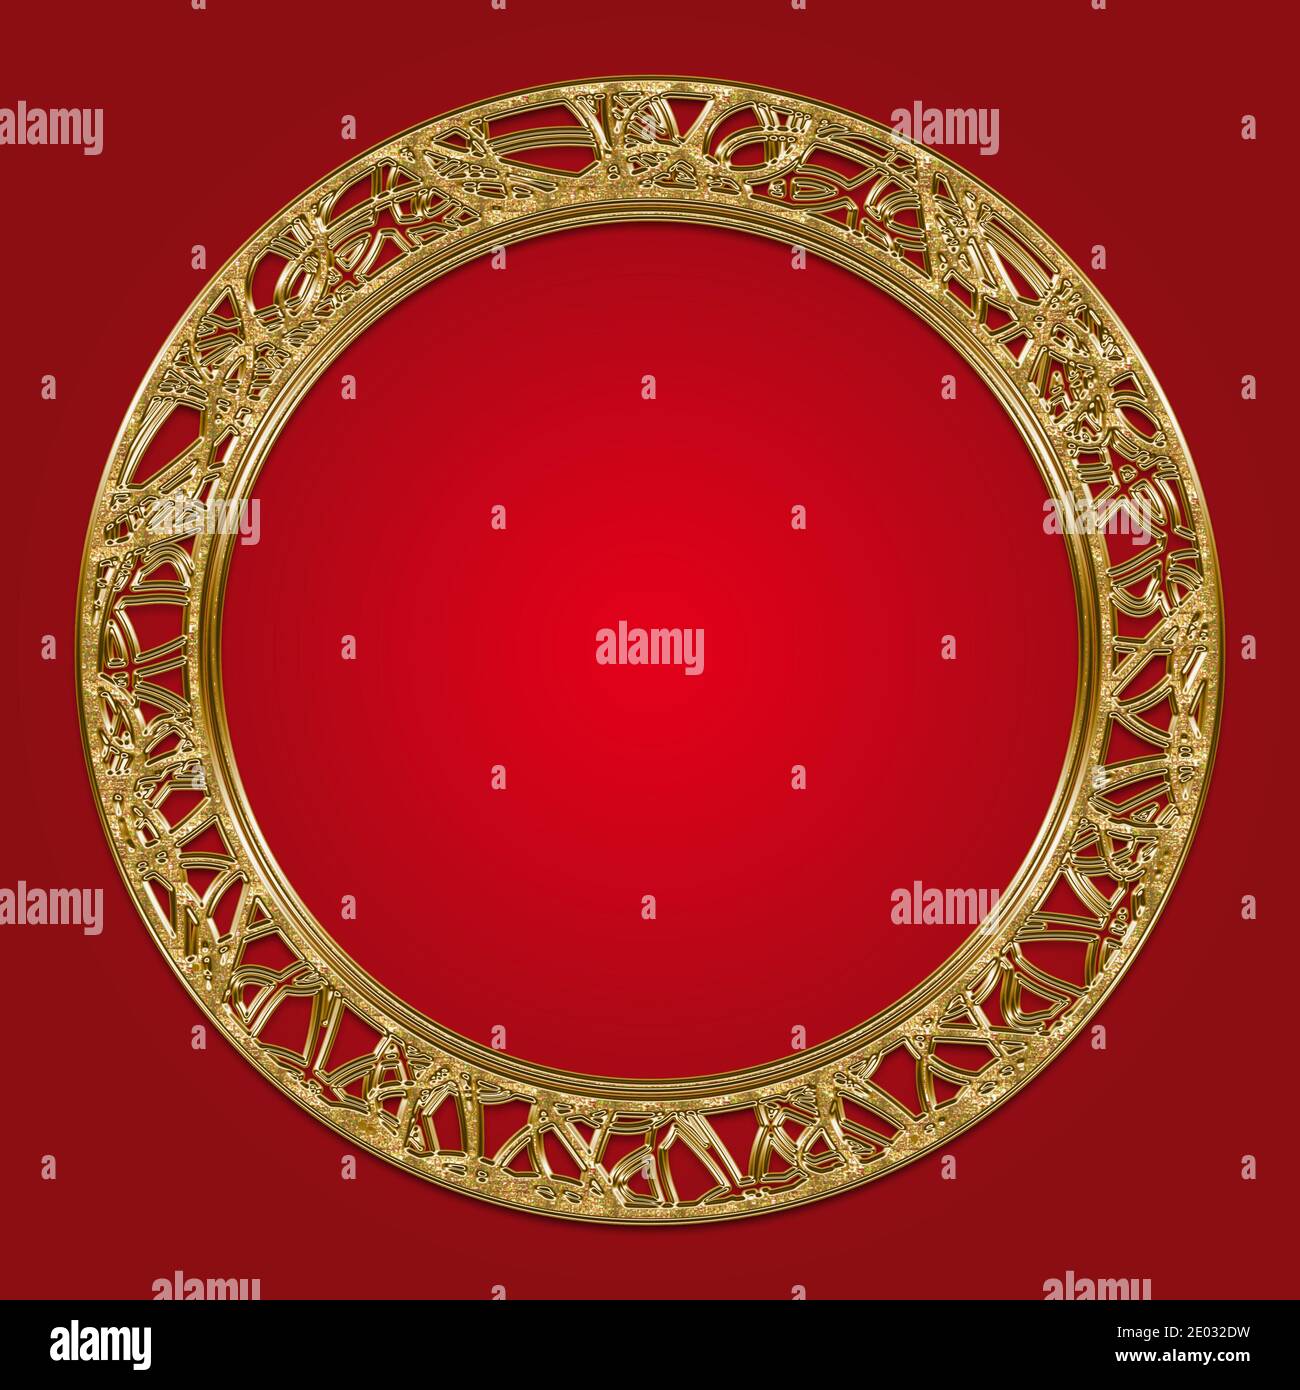 83,717 Royal Frame Round Images, Stock Photos, 3D objects, & Vectors